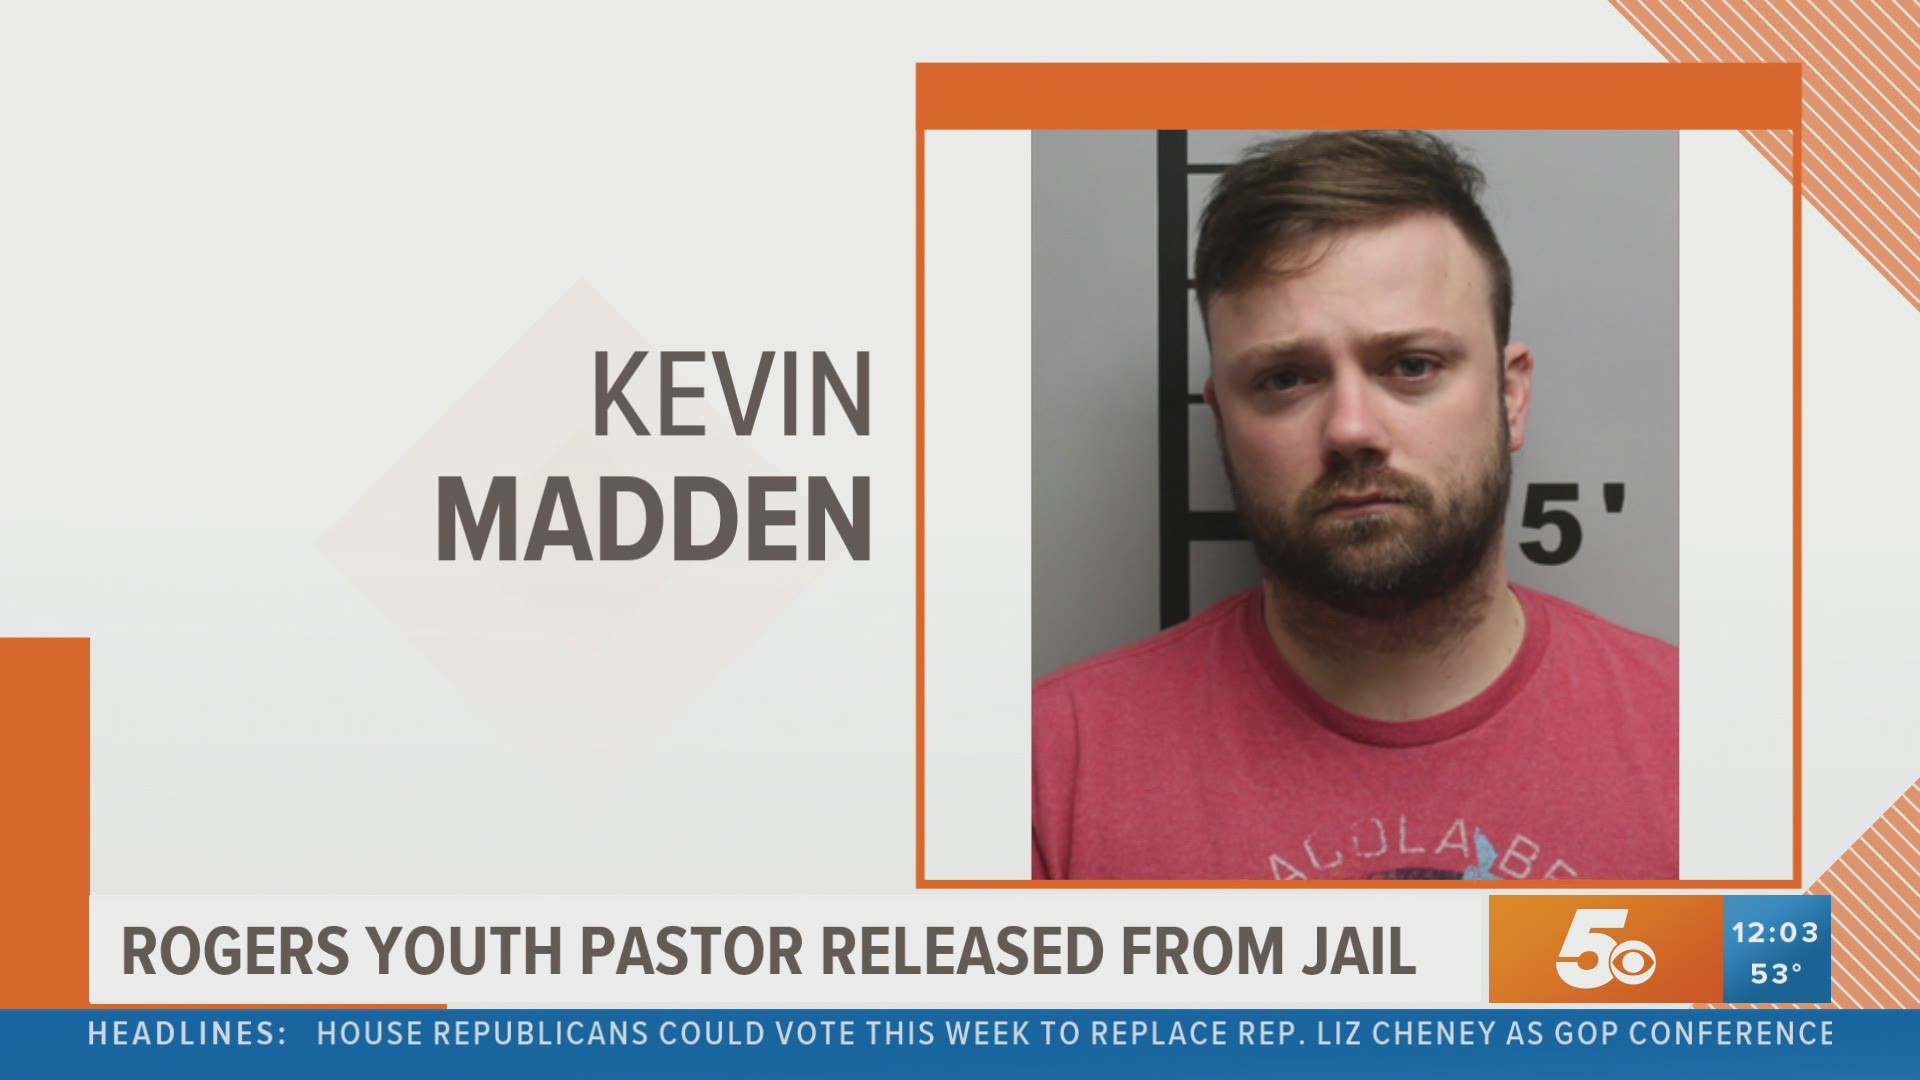 Kevin Madden, a youth pastor at Discover Church in Rogers, is accused of sending nude photos of himself to a female minor.